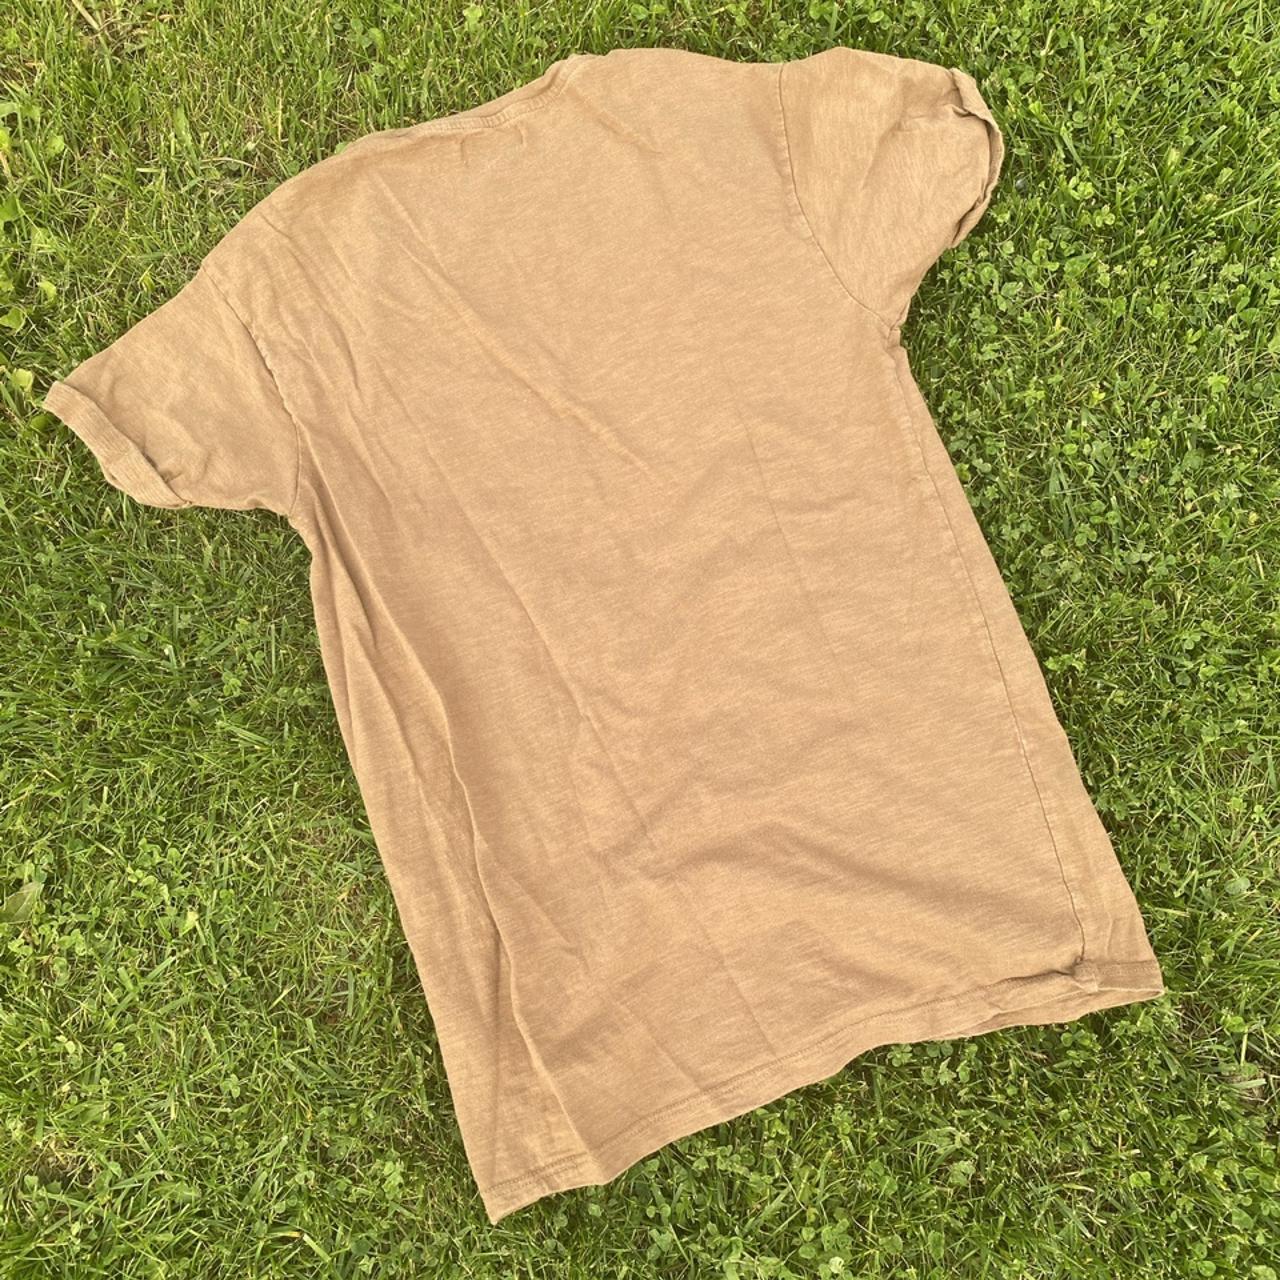 Product Image 2 - light brown Topman simple T-Shirt

Size